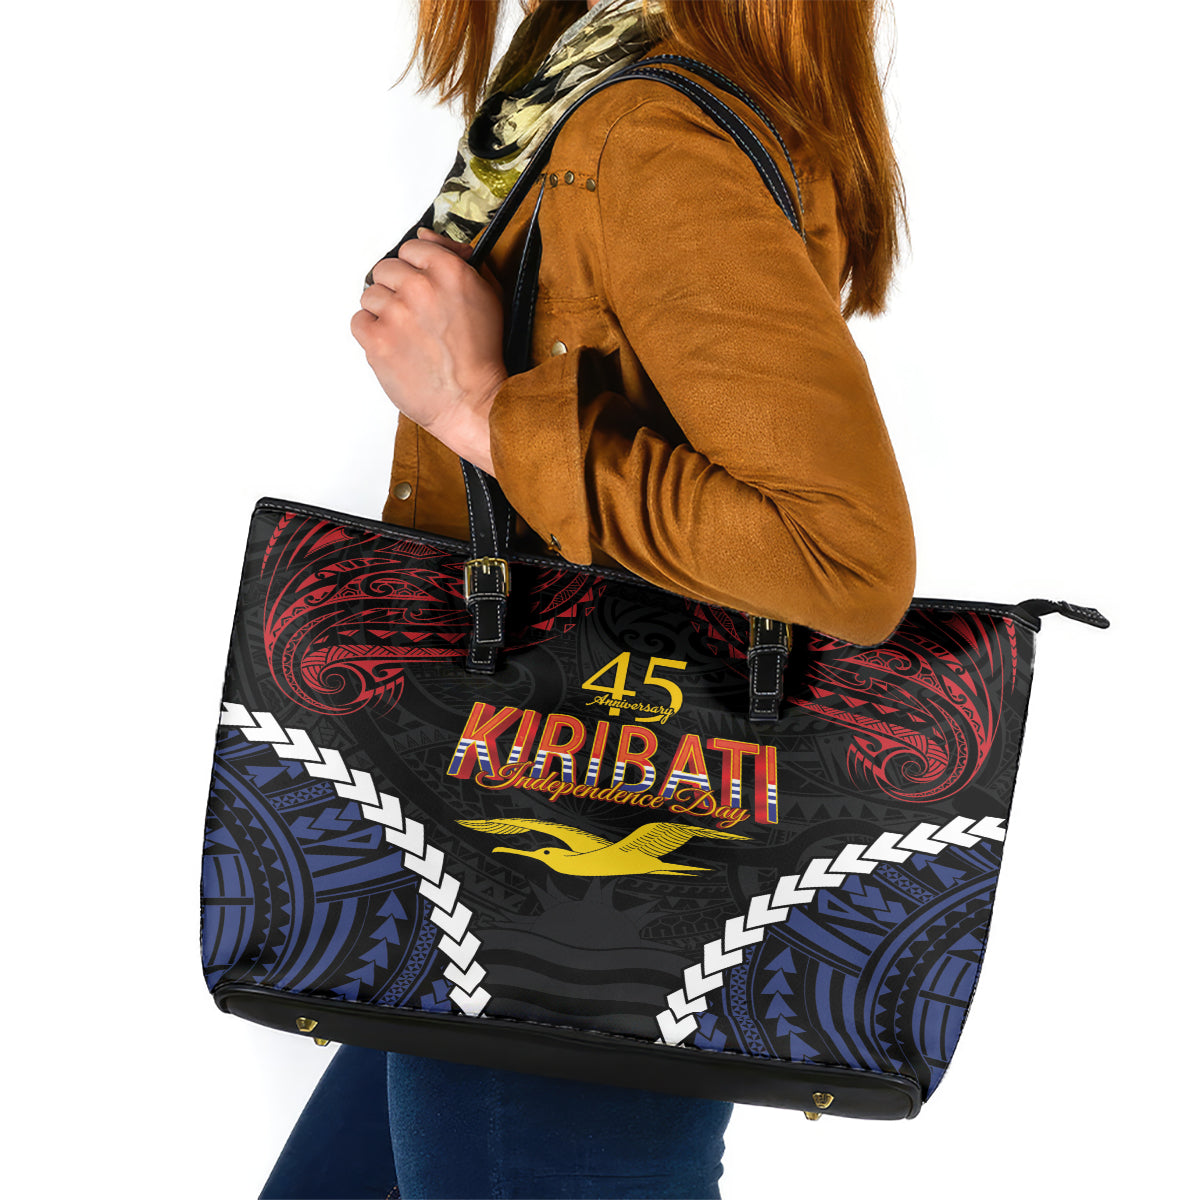 Kiribati 45th Anniversary Independence Day Leather Tote Bag Since 1979